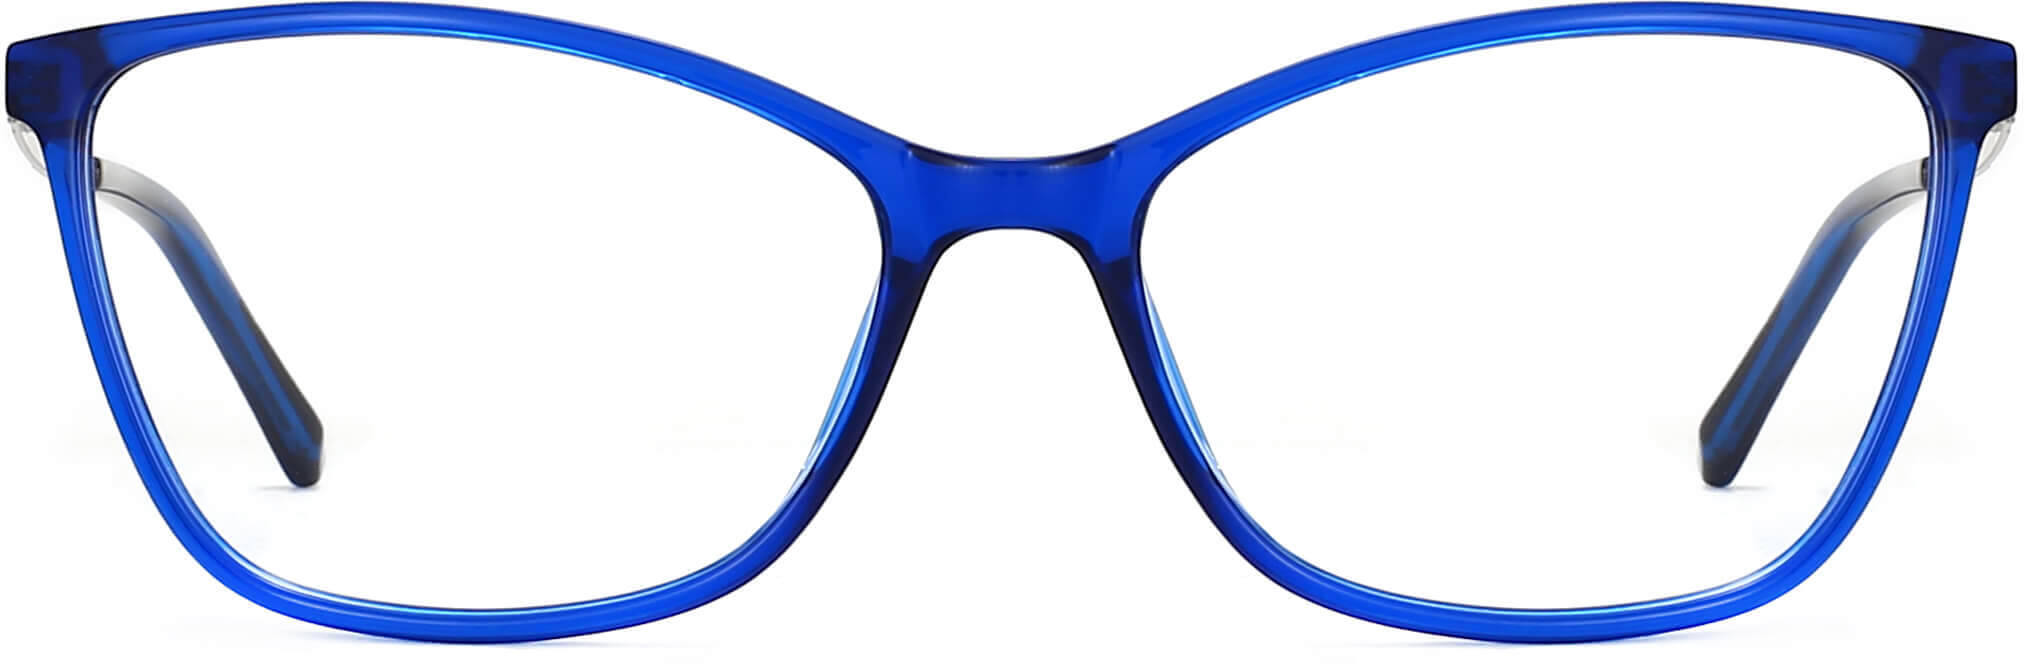 Pisces Cateye Blue Eyeglasses from ANRRI, front view